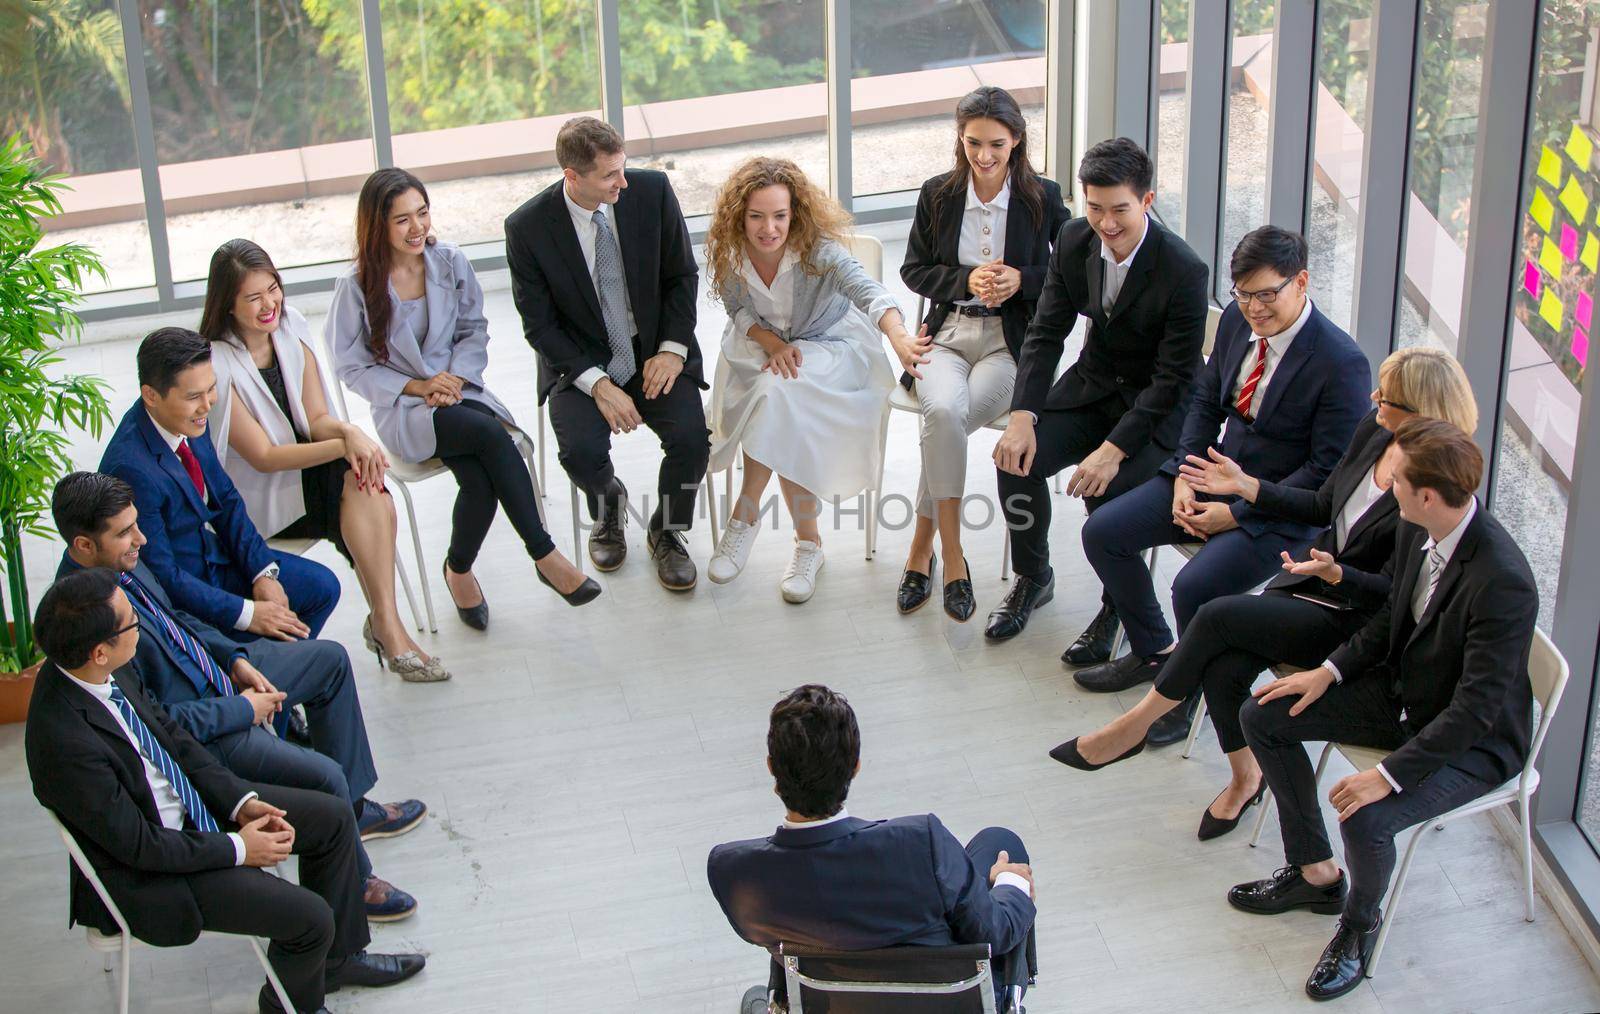 Group of people in Business corporate Event training seminar, the congratulation success of the organization. The conferences event or training education. Business workplace management and development performance.